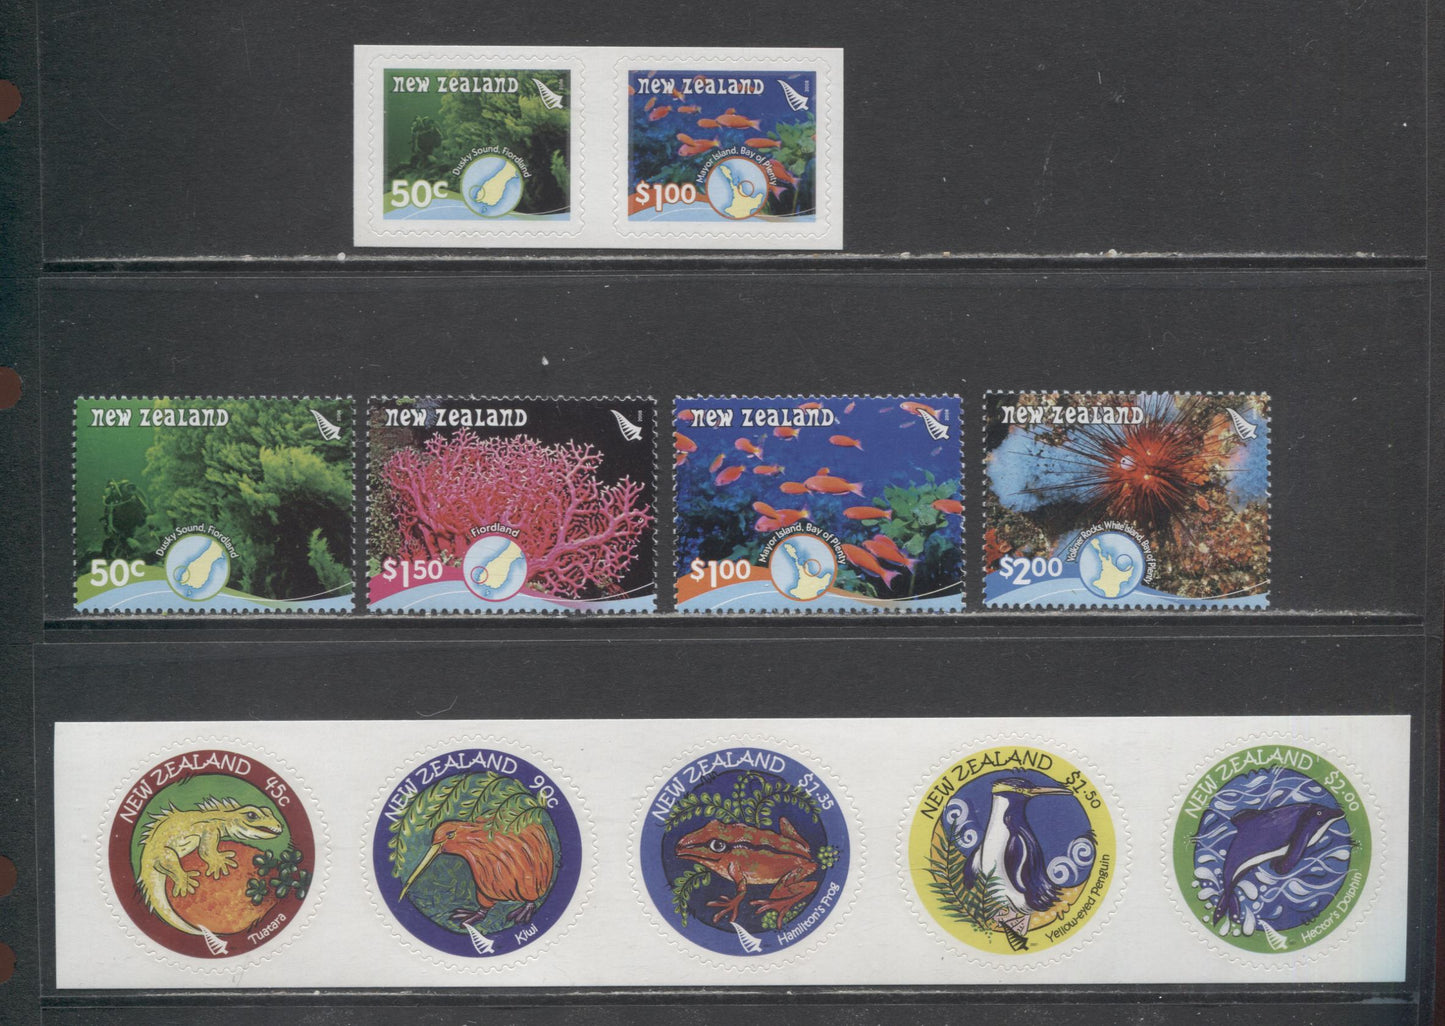 Lot 1 New Zealand SC#2119a/2167a 2007-2008 Indigenous Animals - Reef Issues, 6 VFNH Singles, Pair & Strip Of 5, Click on Listing to See ALL Pictures, 2017 Scott Cat. $19.1